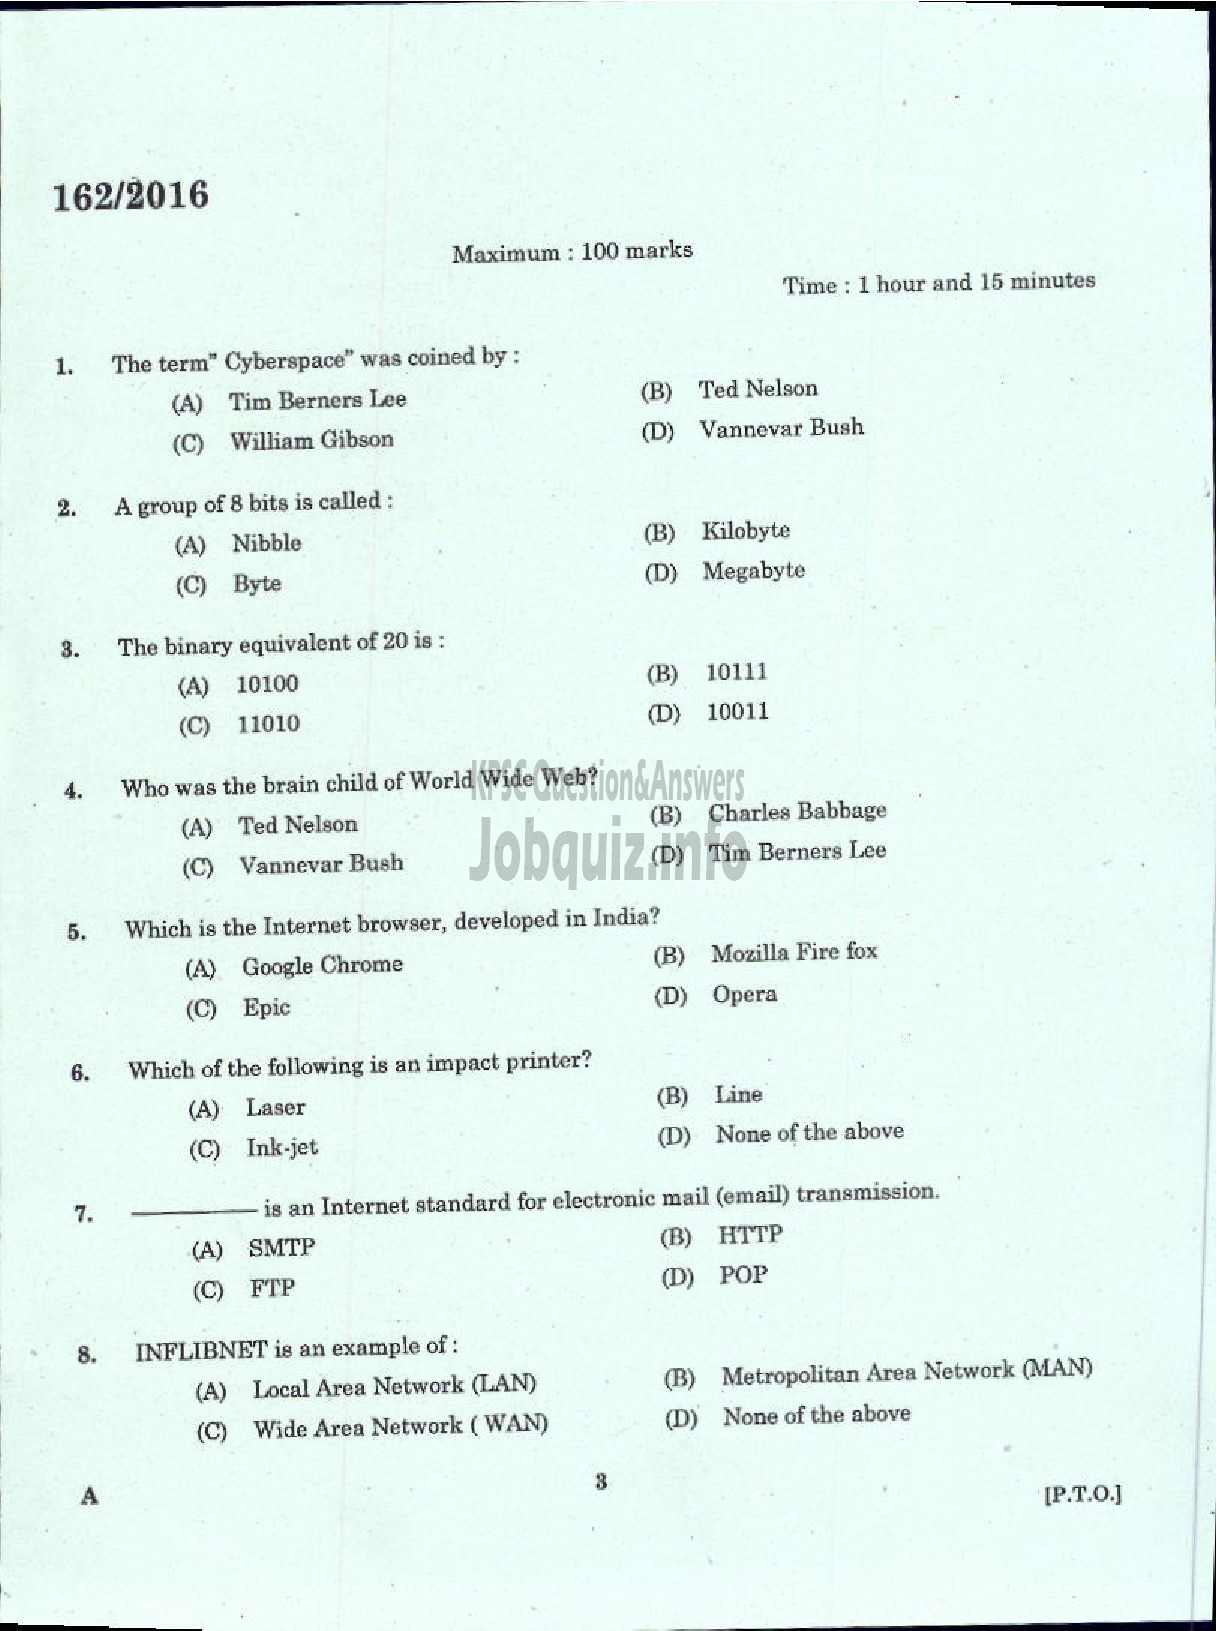 Kerala PSC Question Paper - LIBRARIAN GR IV KERALA COMMON POOL LIBRARY-1